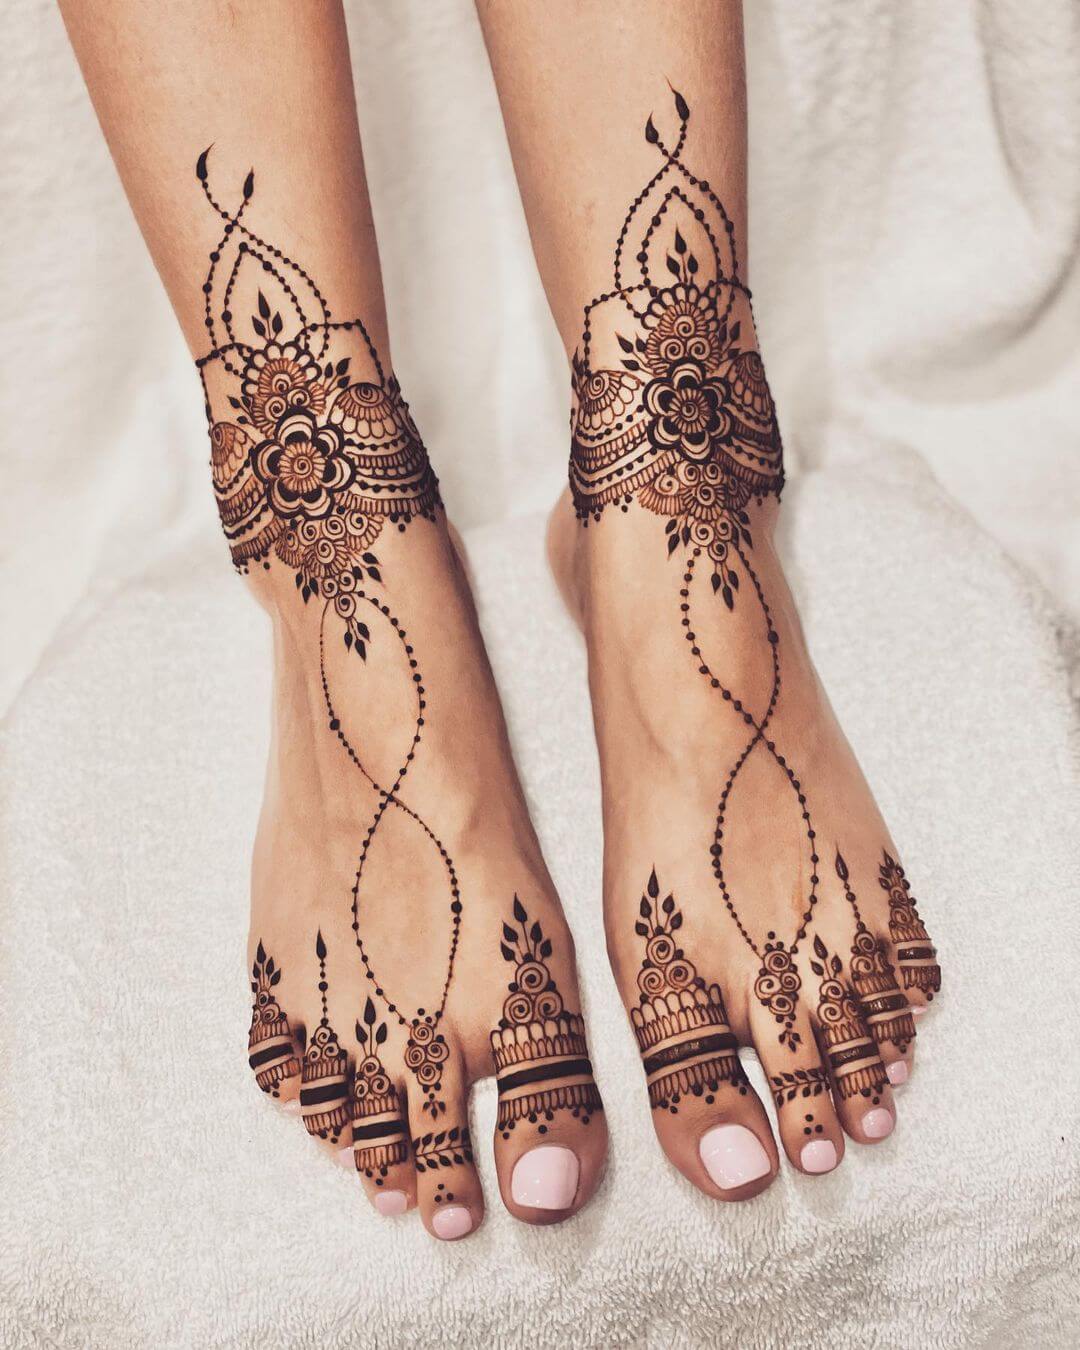 Indian Bridal (Dulhan) Mehndi Designs For Legs FROM THE SWIRLY QUIRKY WILD WEST